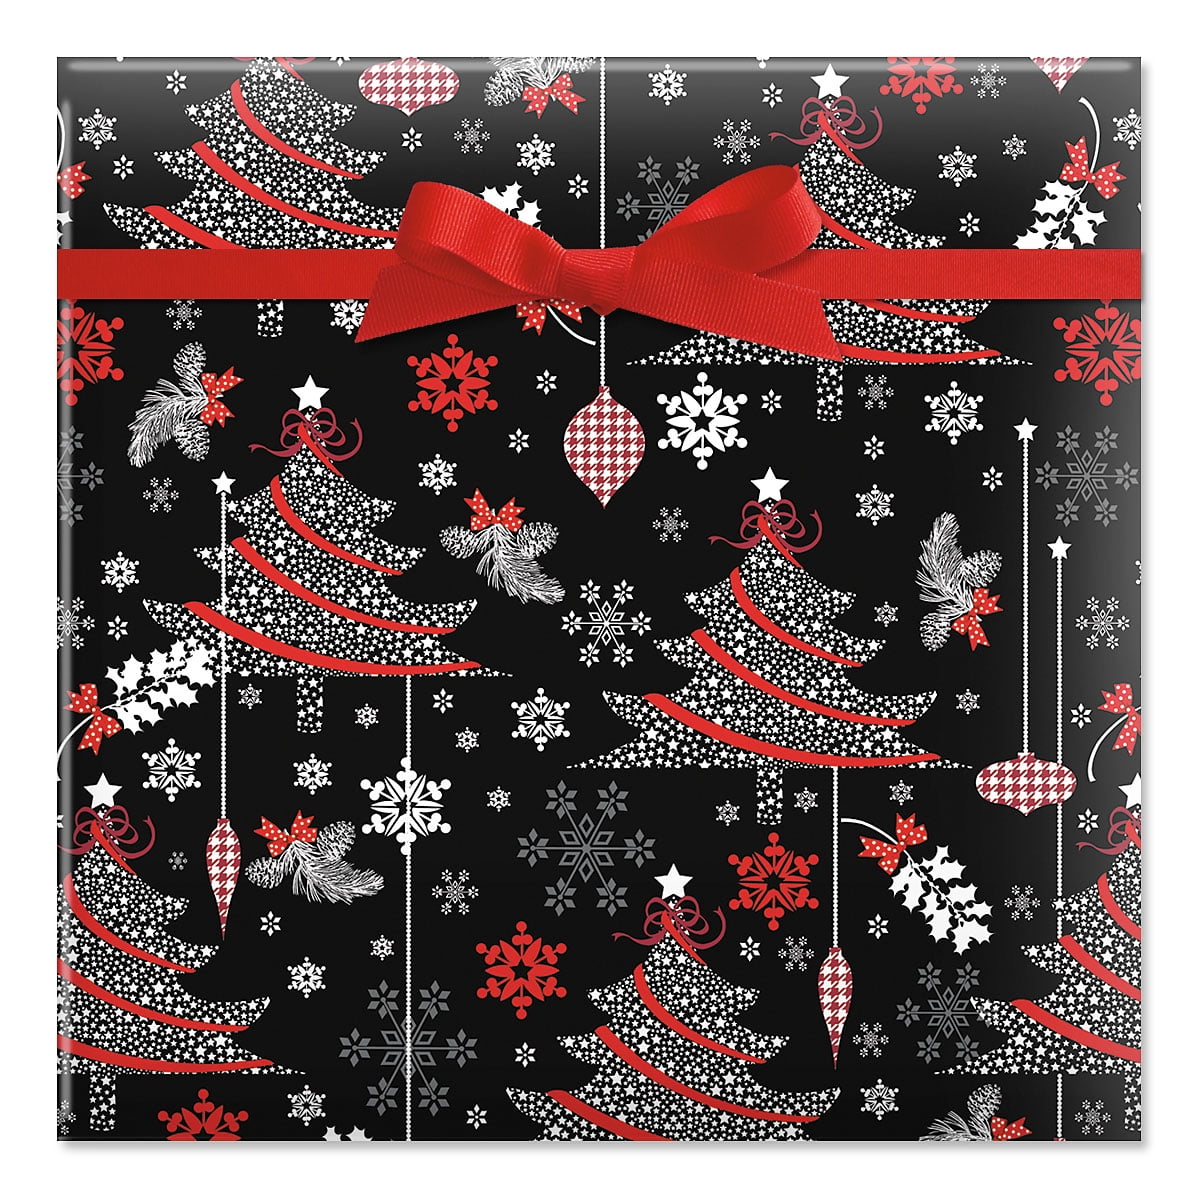 Rustic Plaid Snowman Christmas Rolled Gift Wrap, 1 Giant Roll, 23x35' (67  Sq. feet) Heavyweight Wrapping Paper 